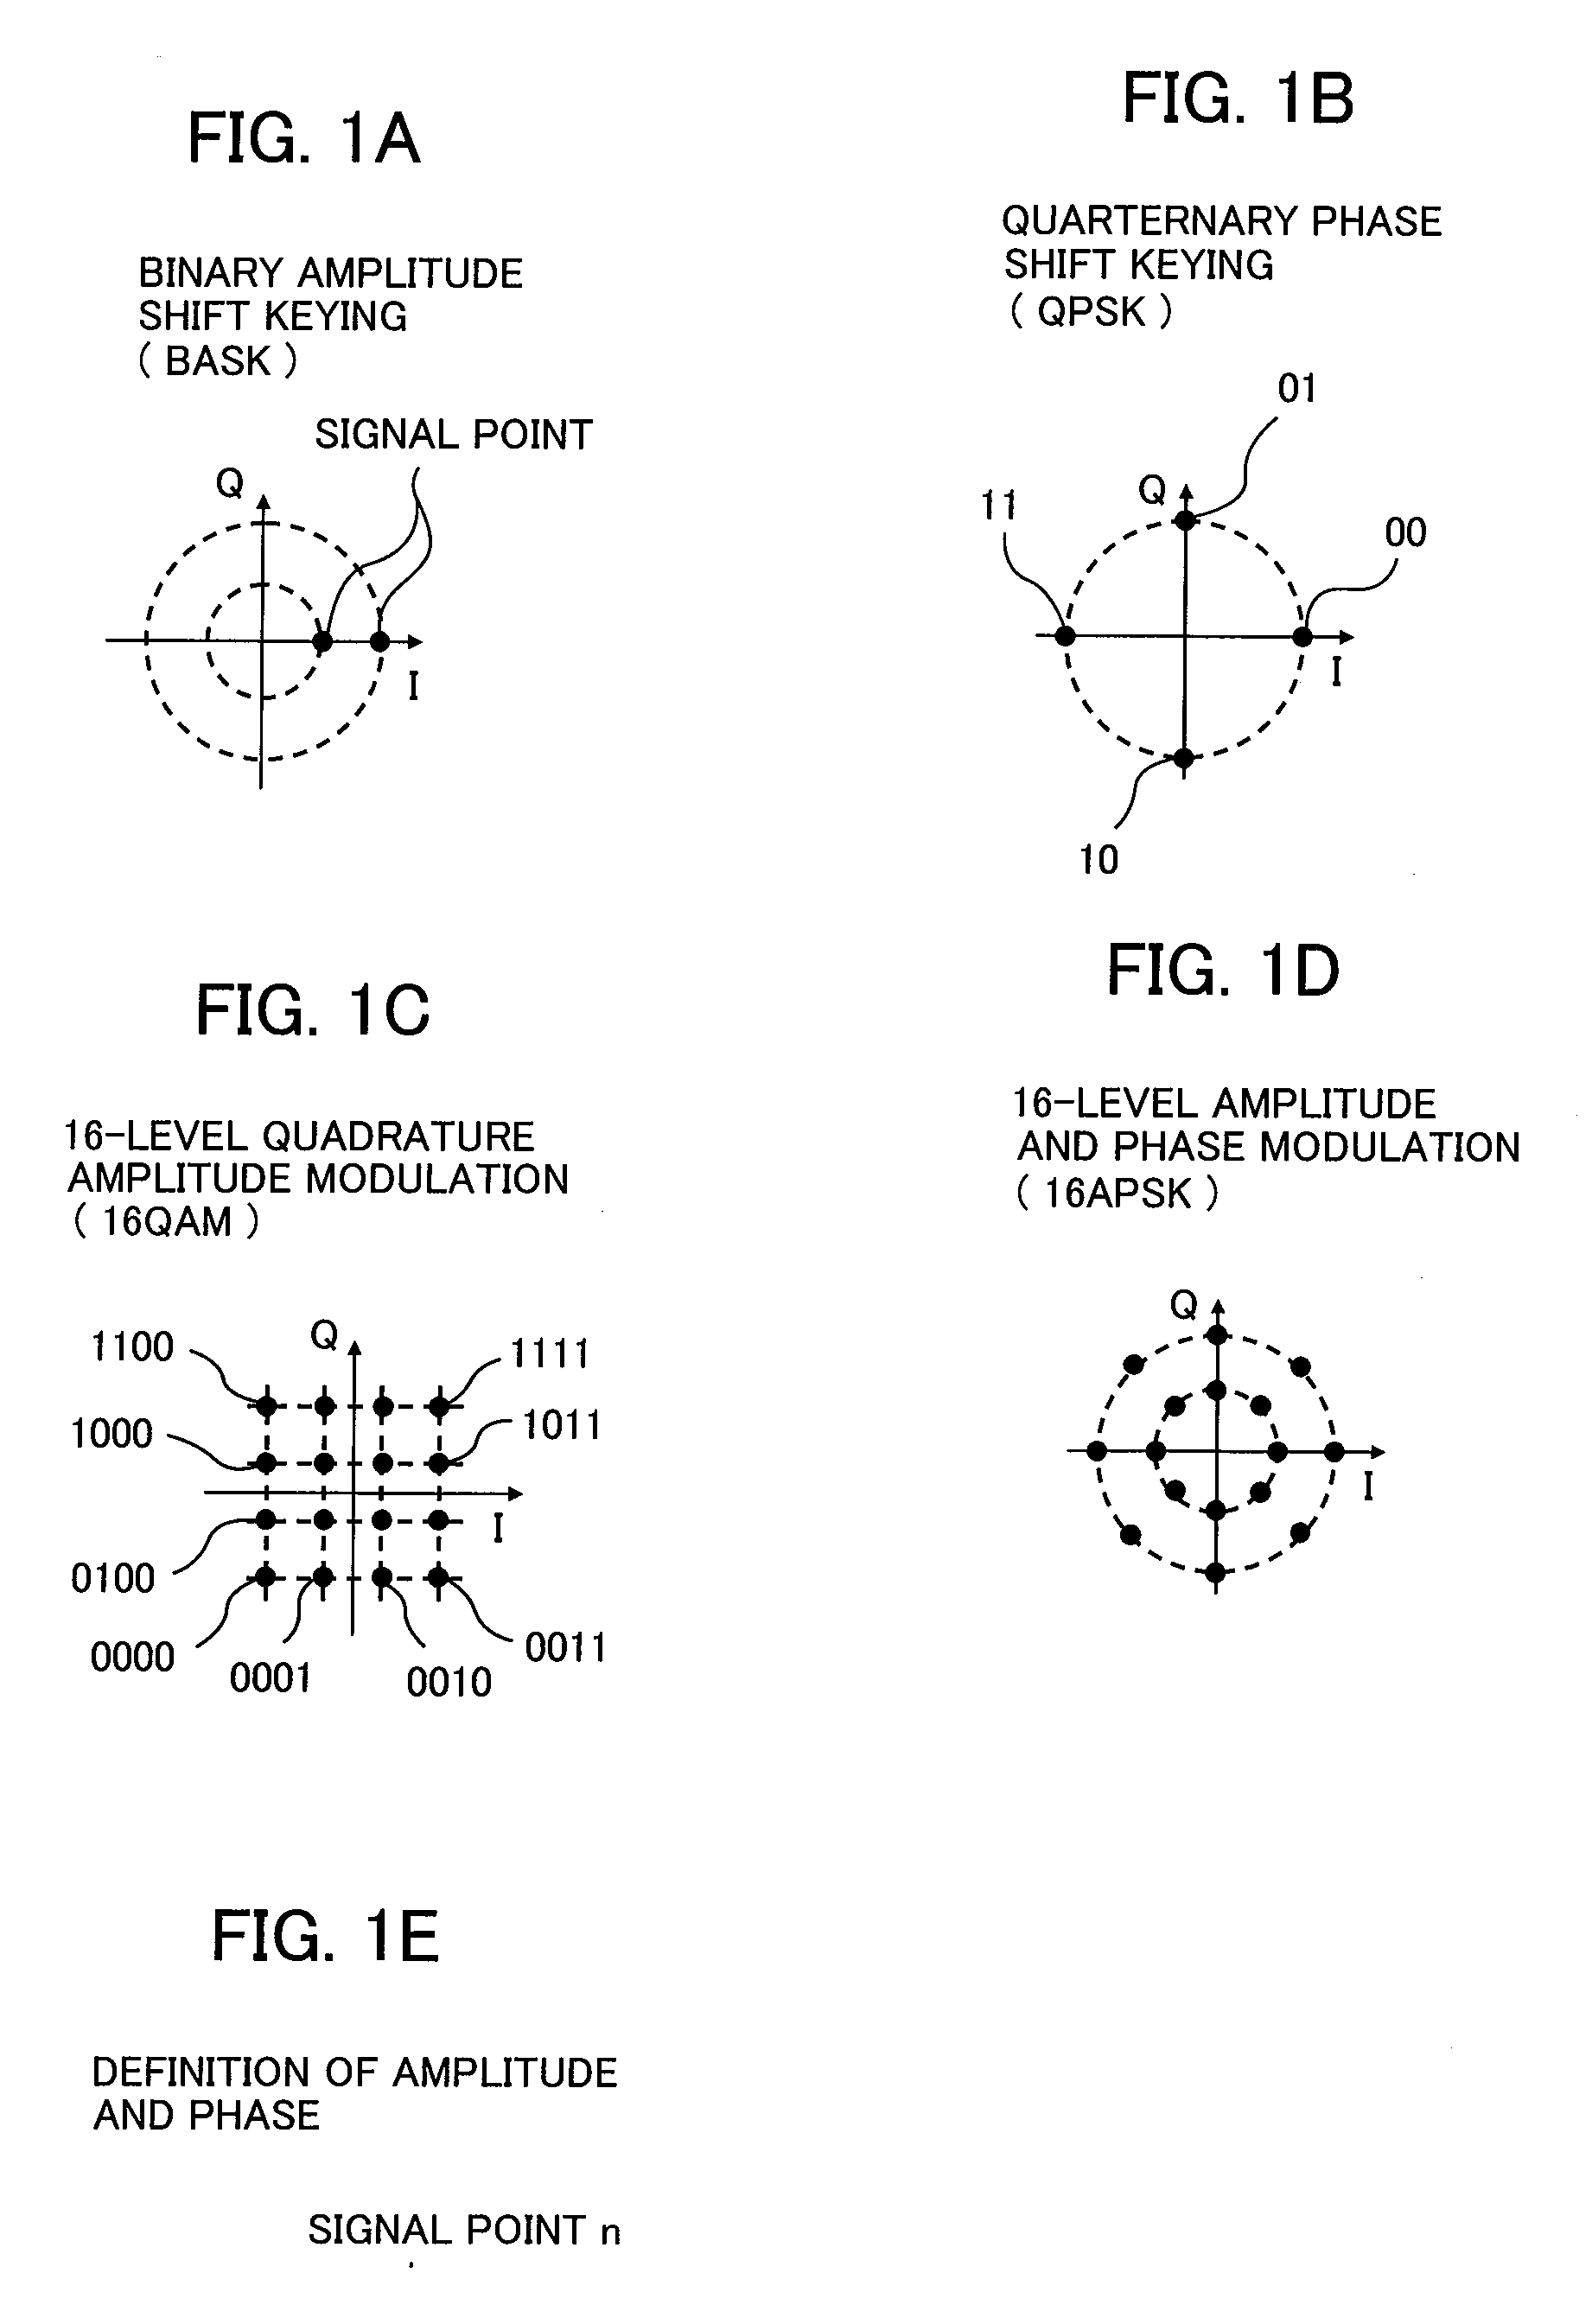 Optical field receiver and optical transmission system